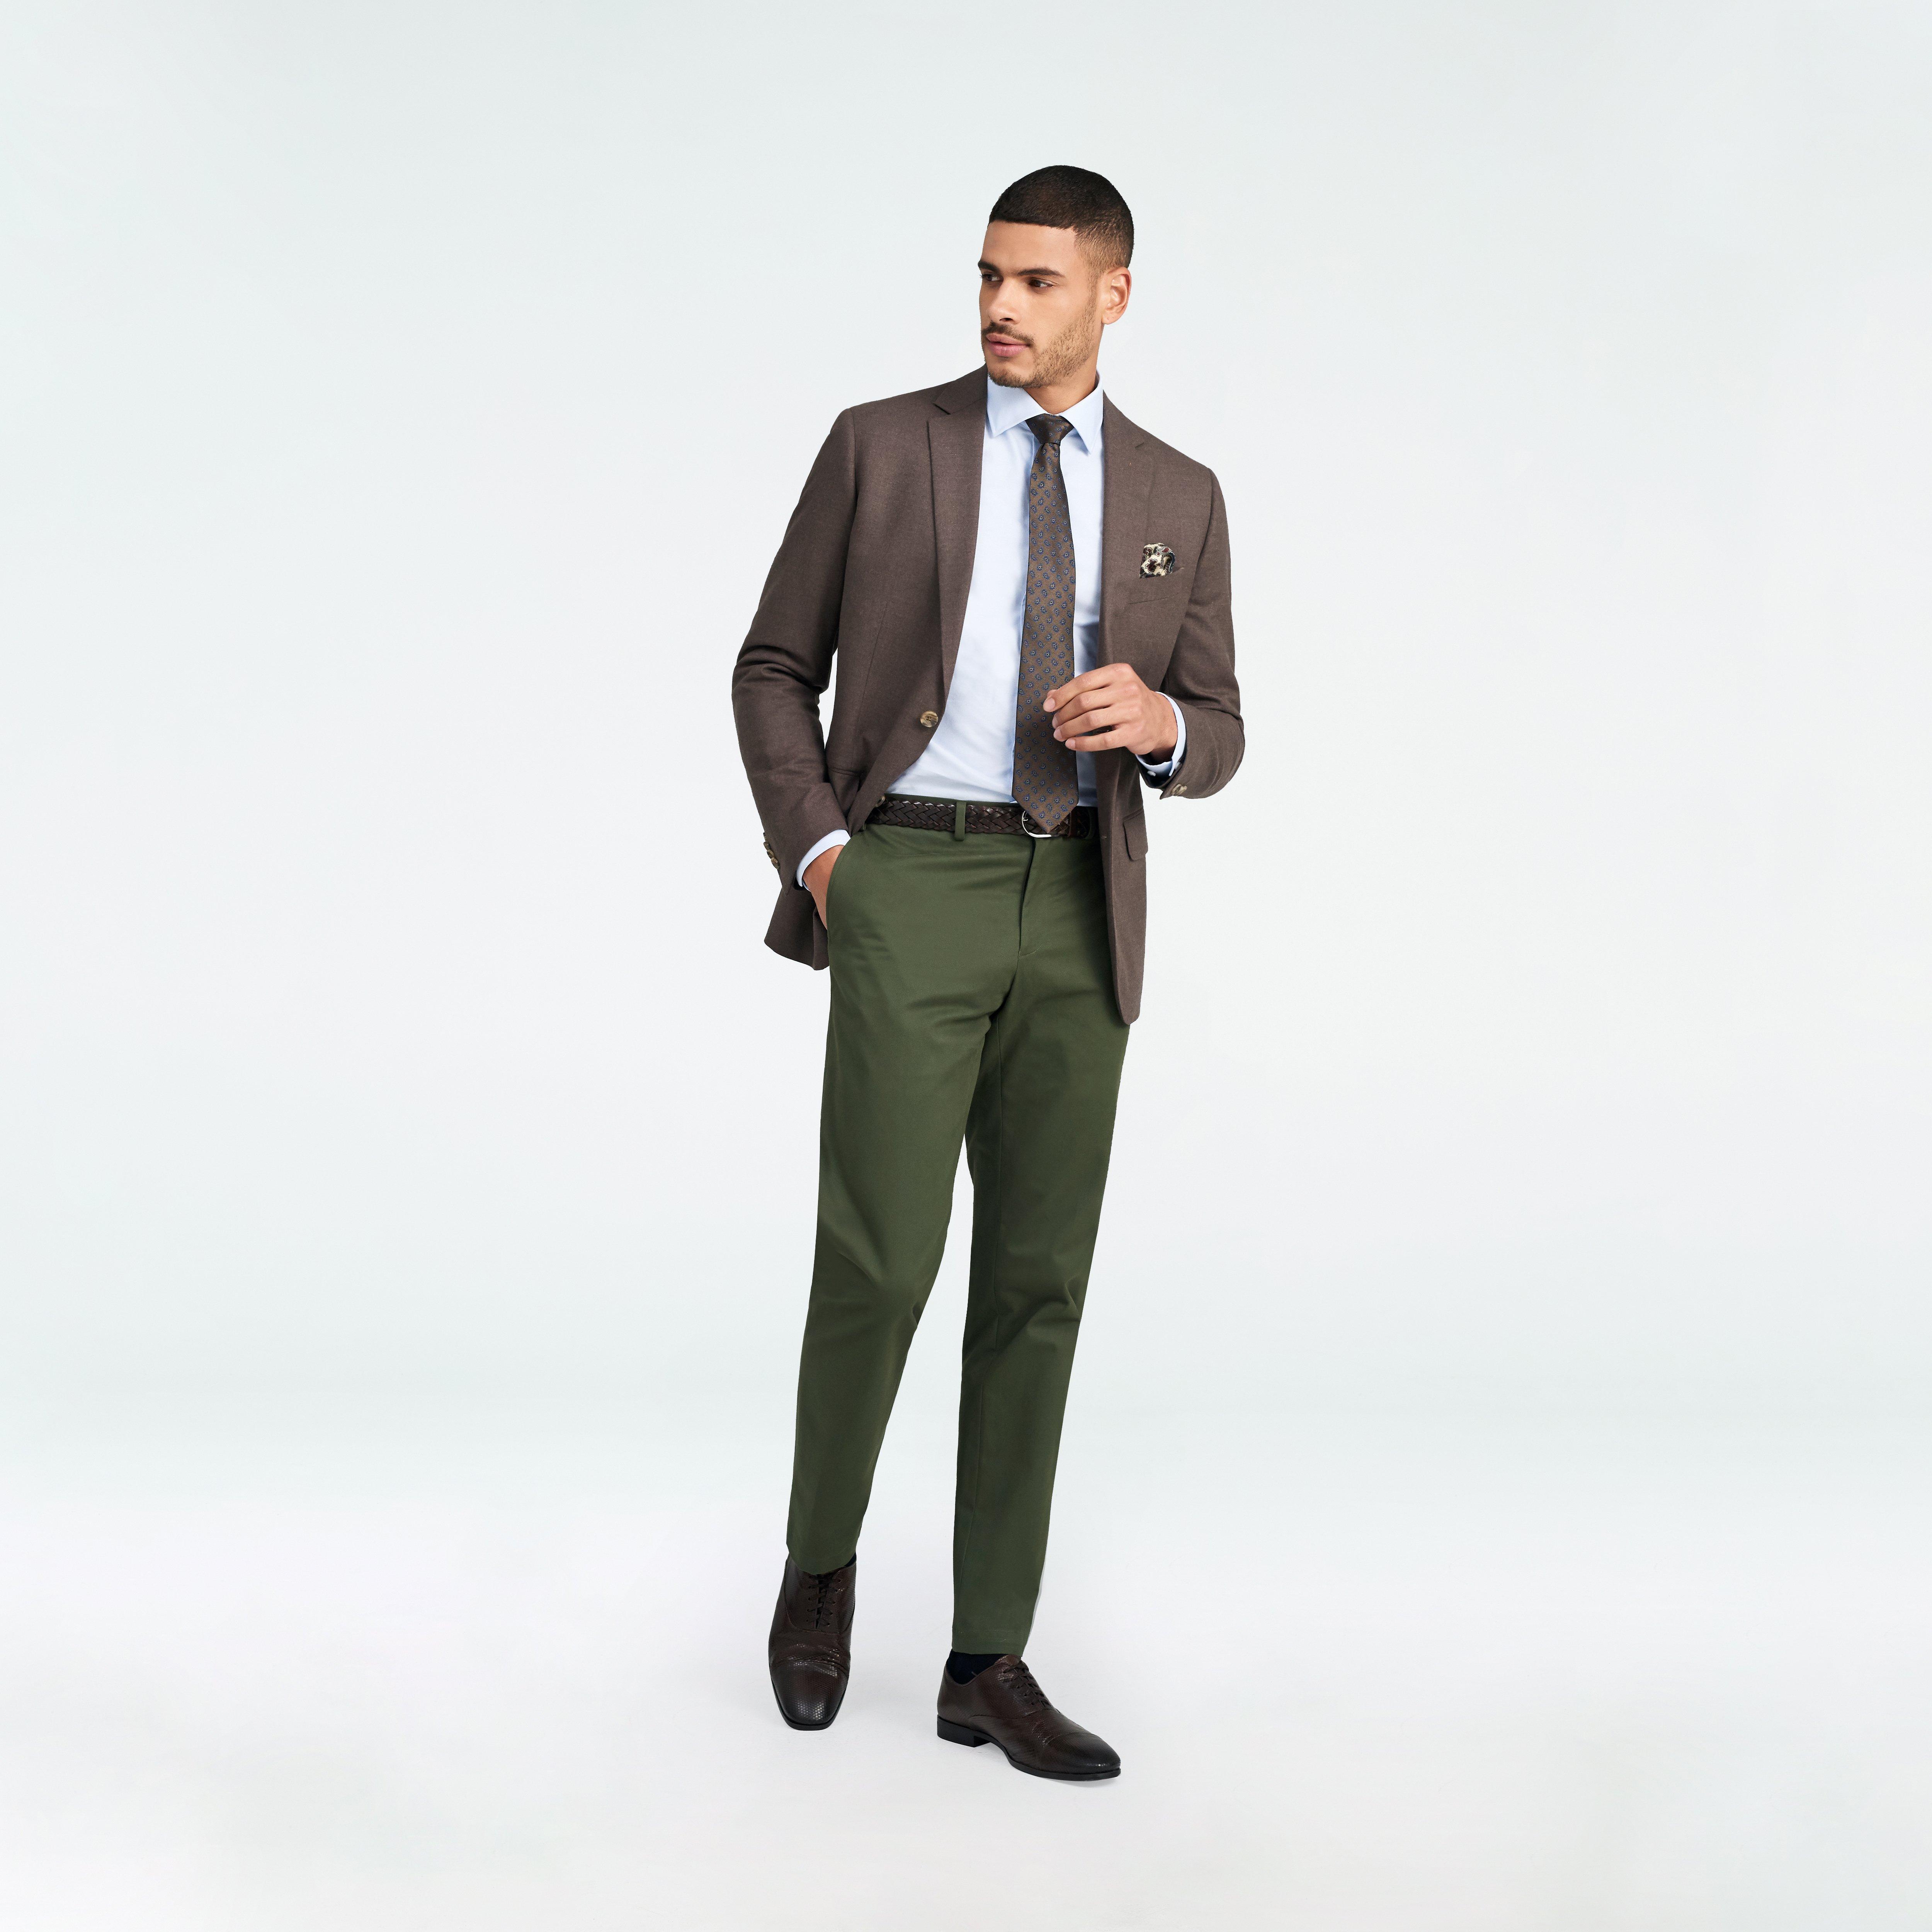 Olive Jeans For Tall Men | Olive Green Wash Jeans | American Tall